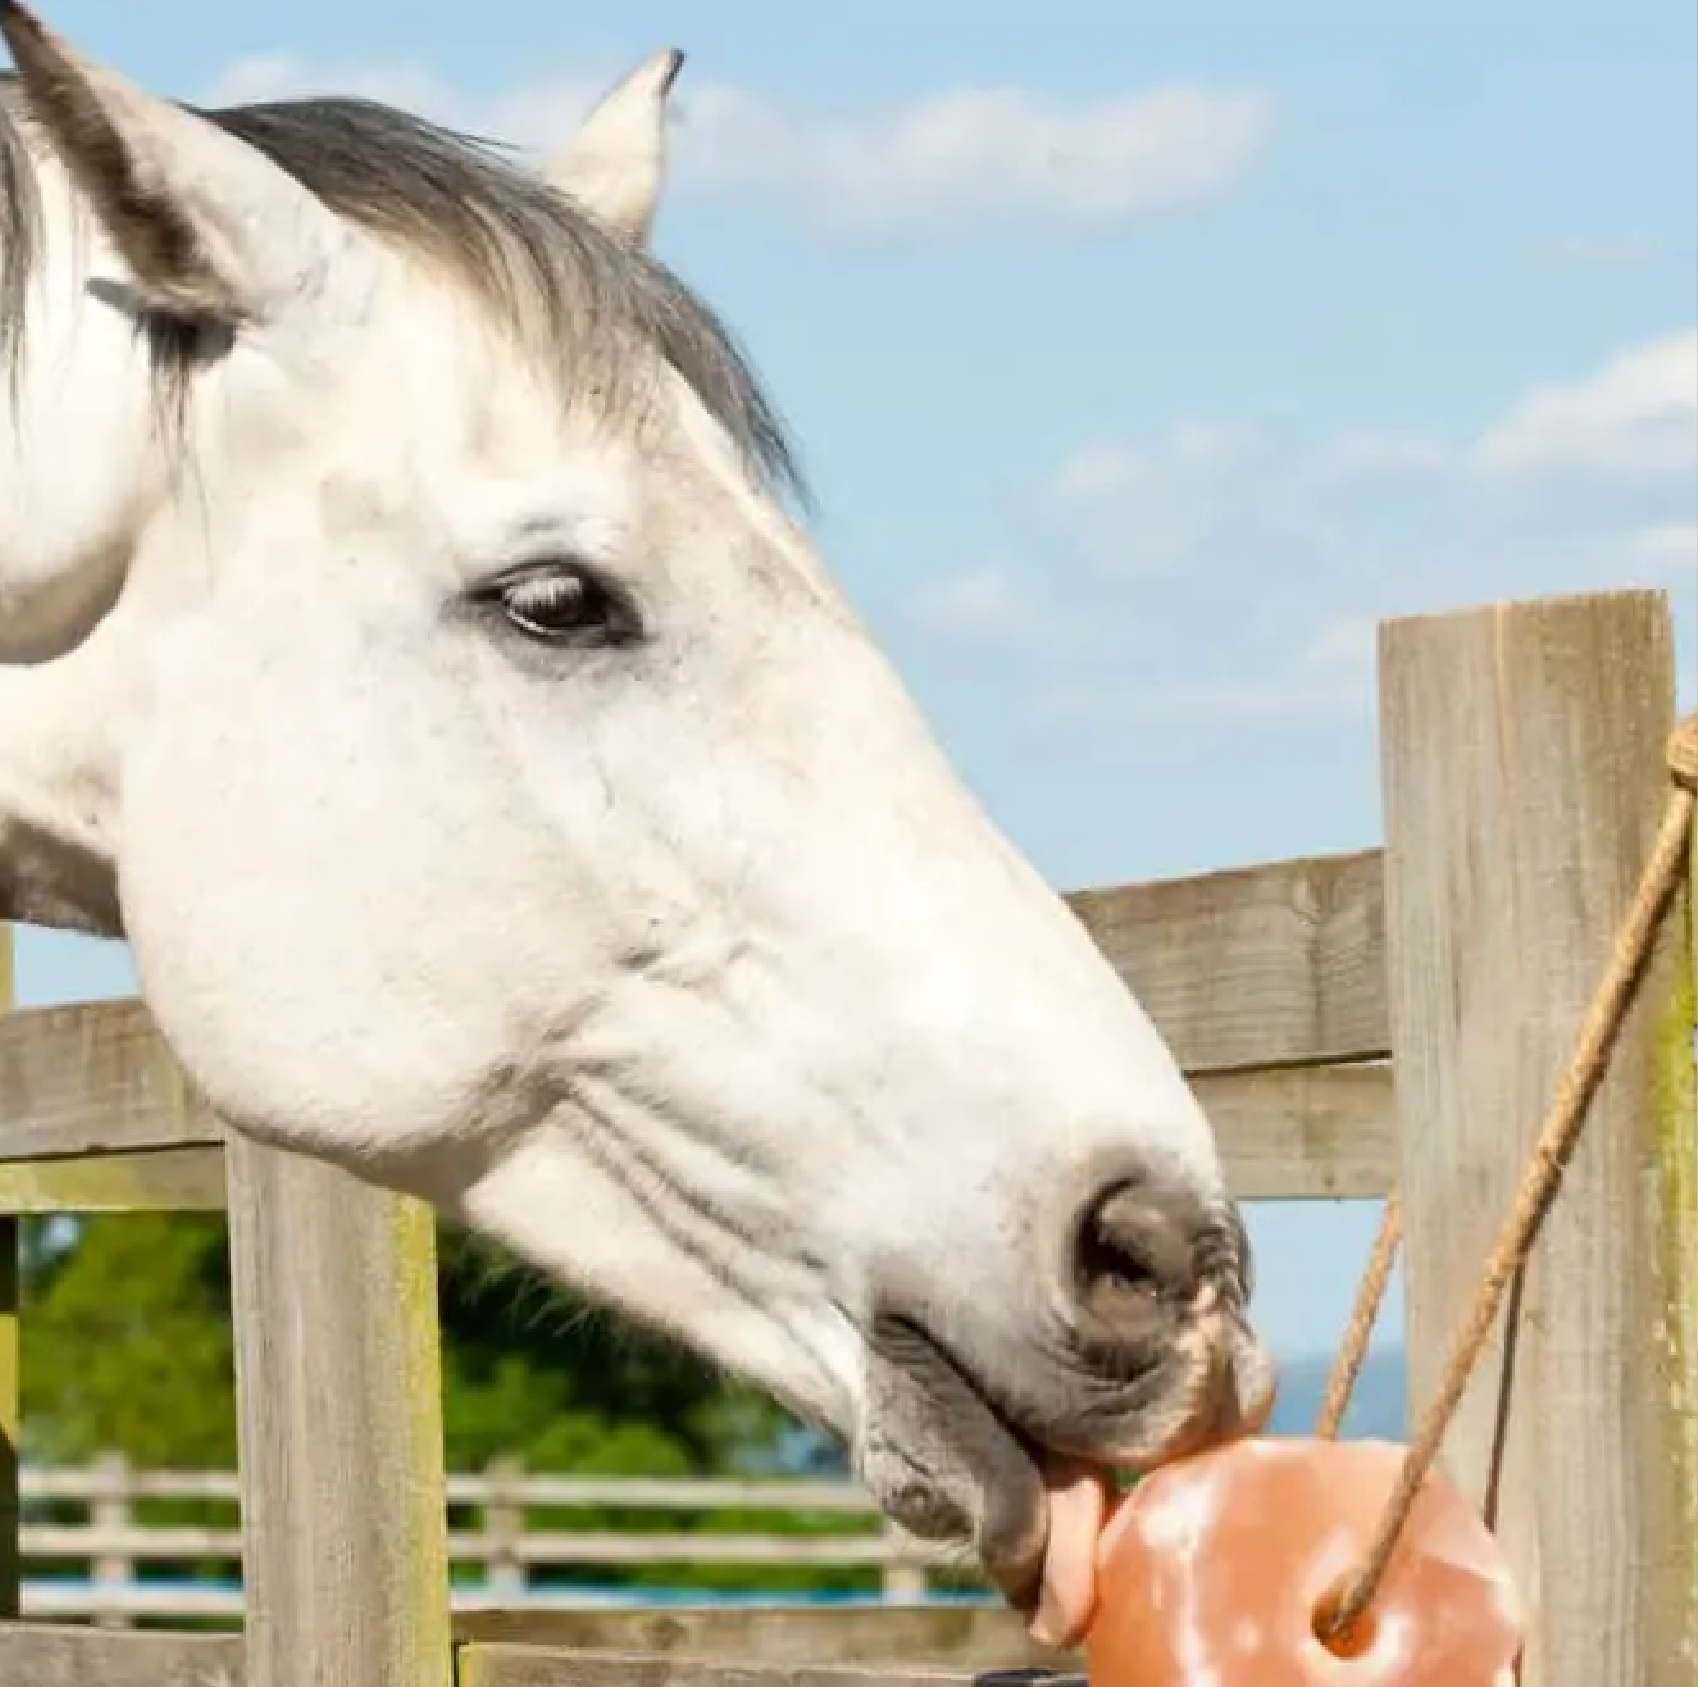 Animal Licking Salt block for horse - Unified Business Experts